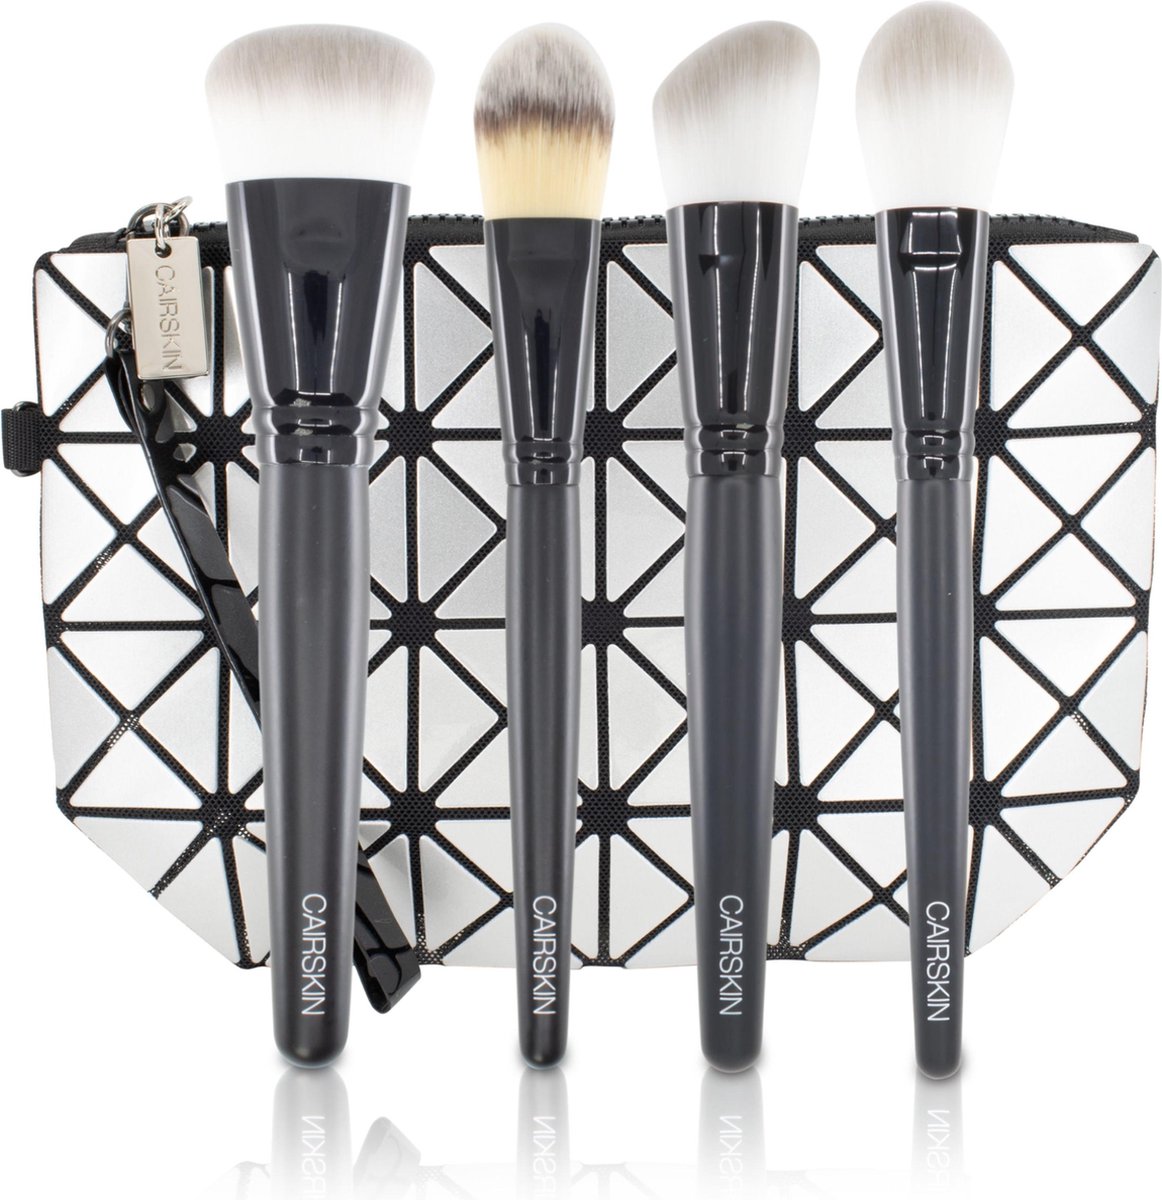 CAIRSKIN Professional Brush Set - 4 Pro Gloss Face Set for Shaping, Foundation, Blush and Angled Buffer Brush + Large Beauty Bag